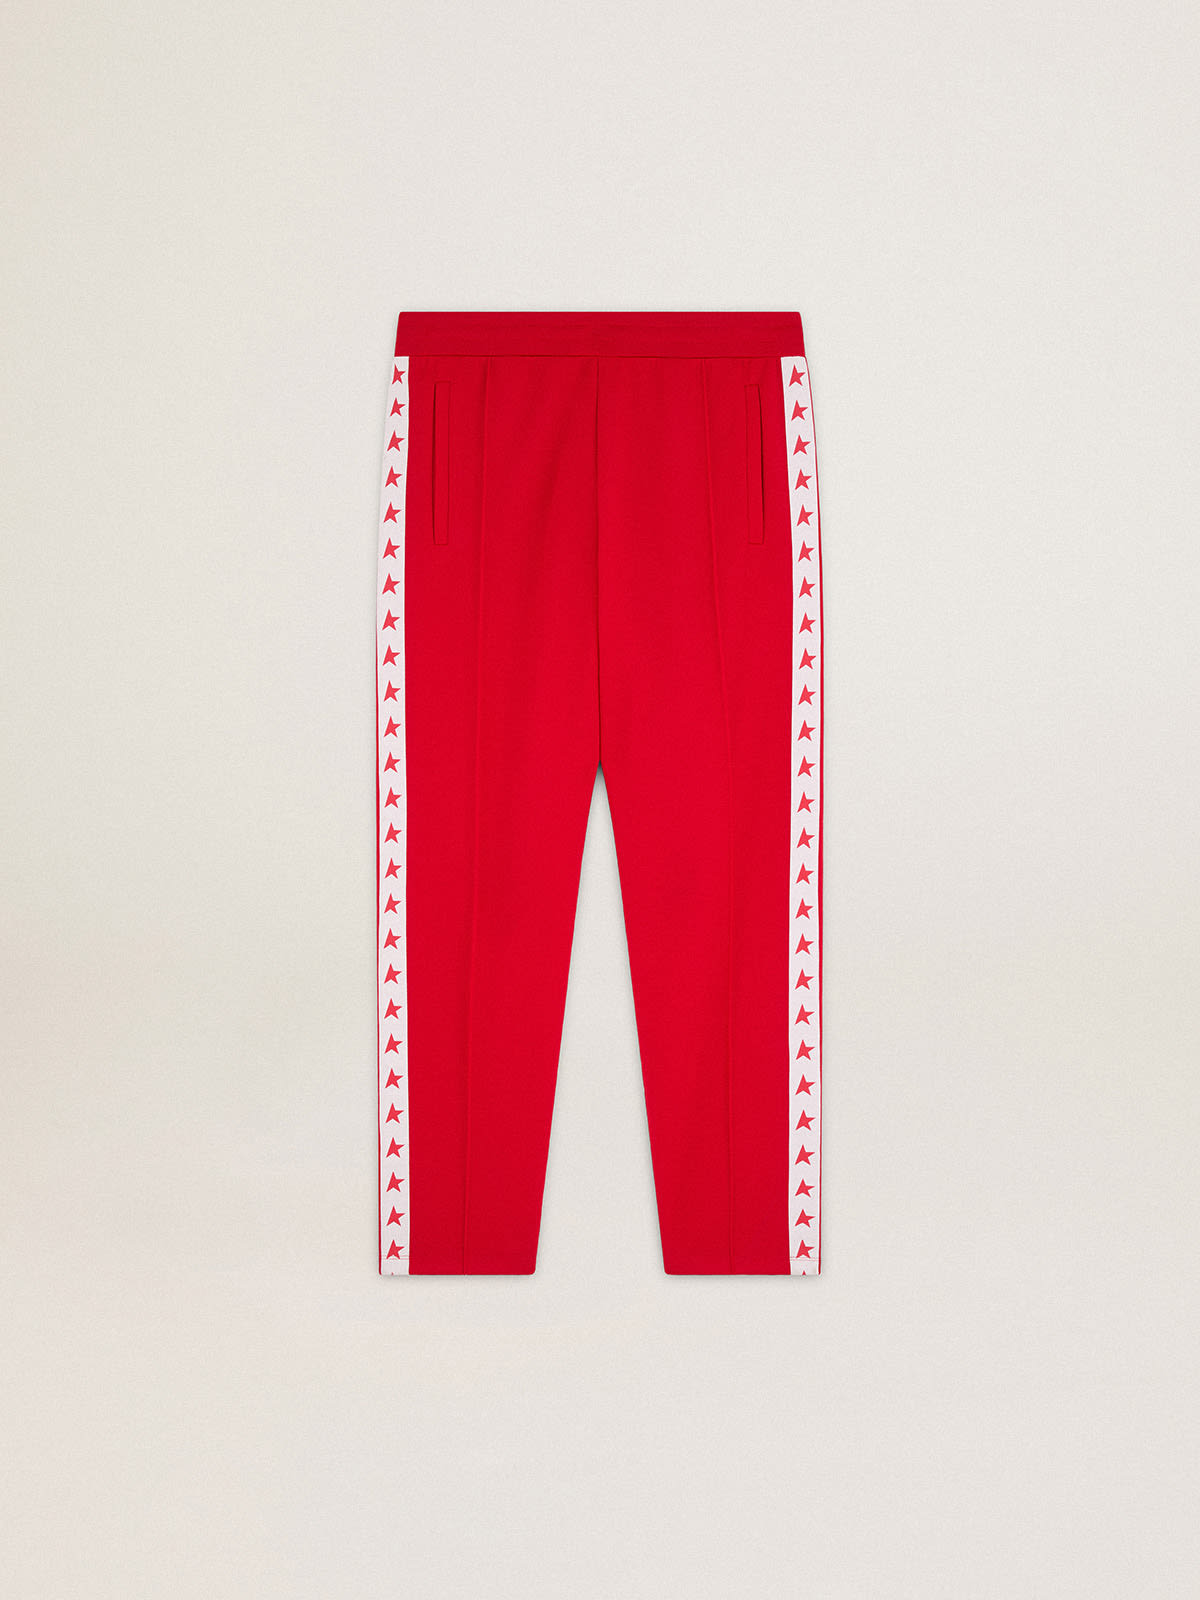 Golden Goose - Red Doro Star Collection jogging pants with red stars on the sides in 